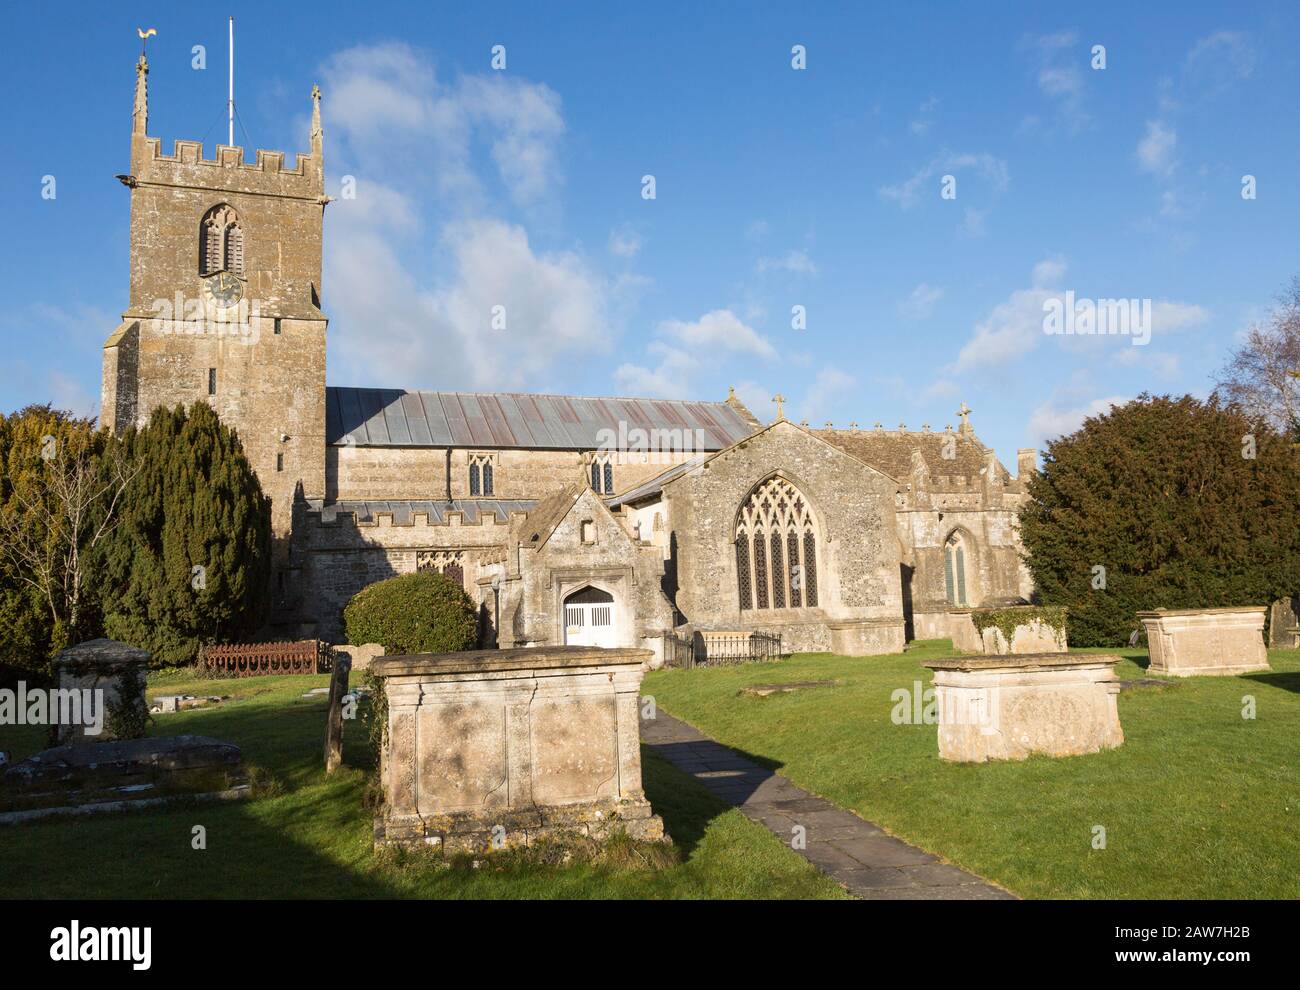 Historic village parish church of Saint Michael and All Angels, Urchfont, Wiltshire, England, UK Vale of Pewsey Stock Photo